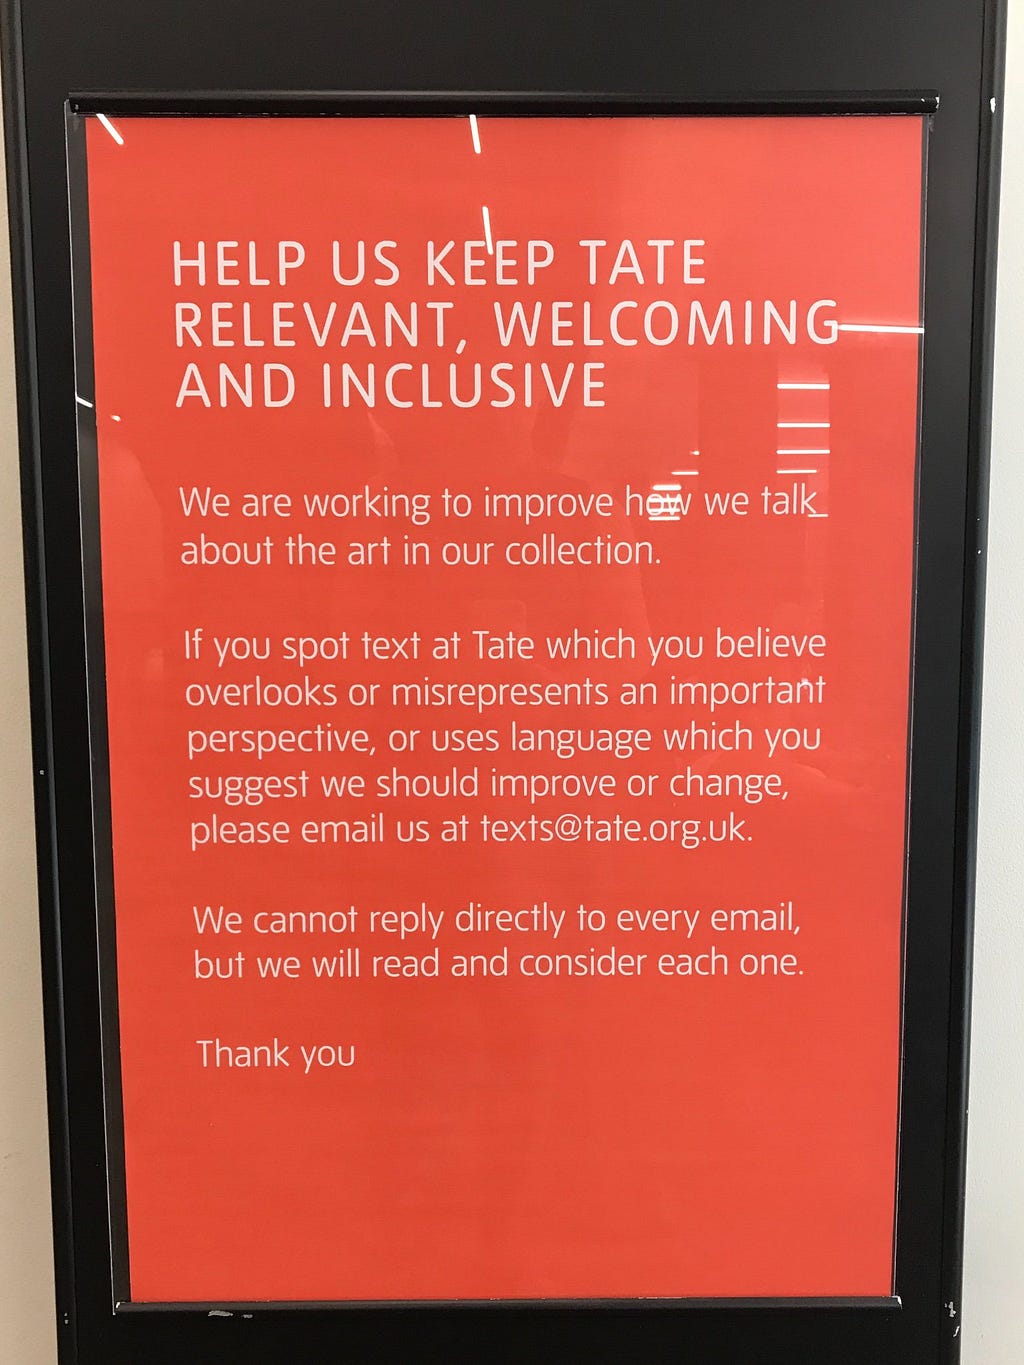 A text-only sign from the Tate Museum with the headline: Help Us Keep Tate Relevant, Welcoming and Inclusive.